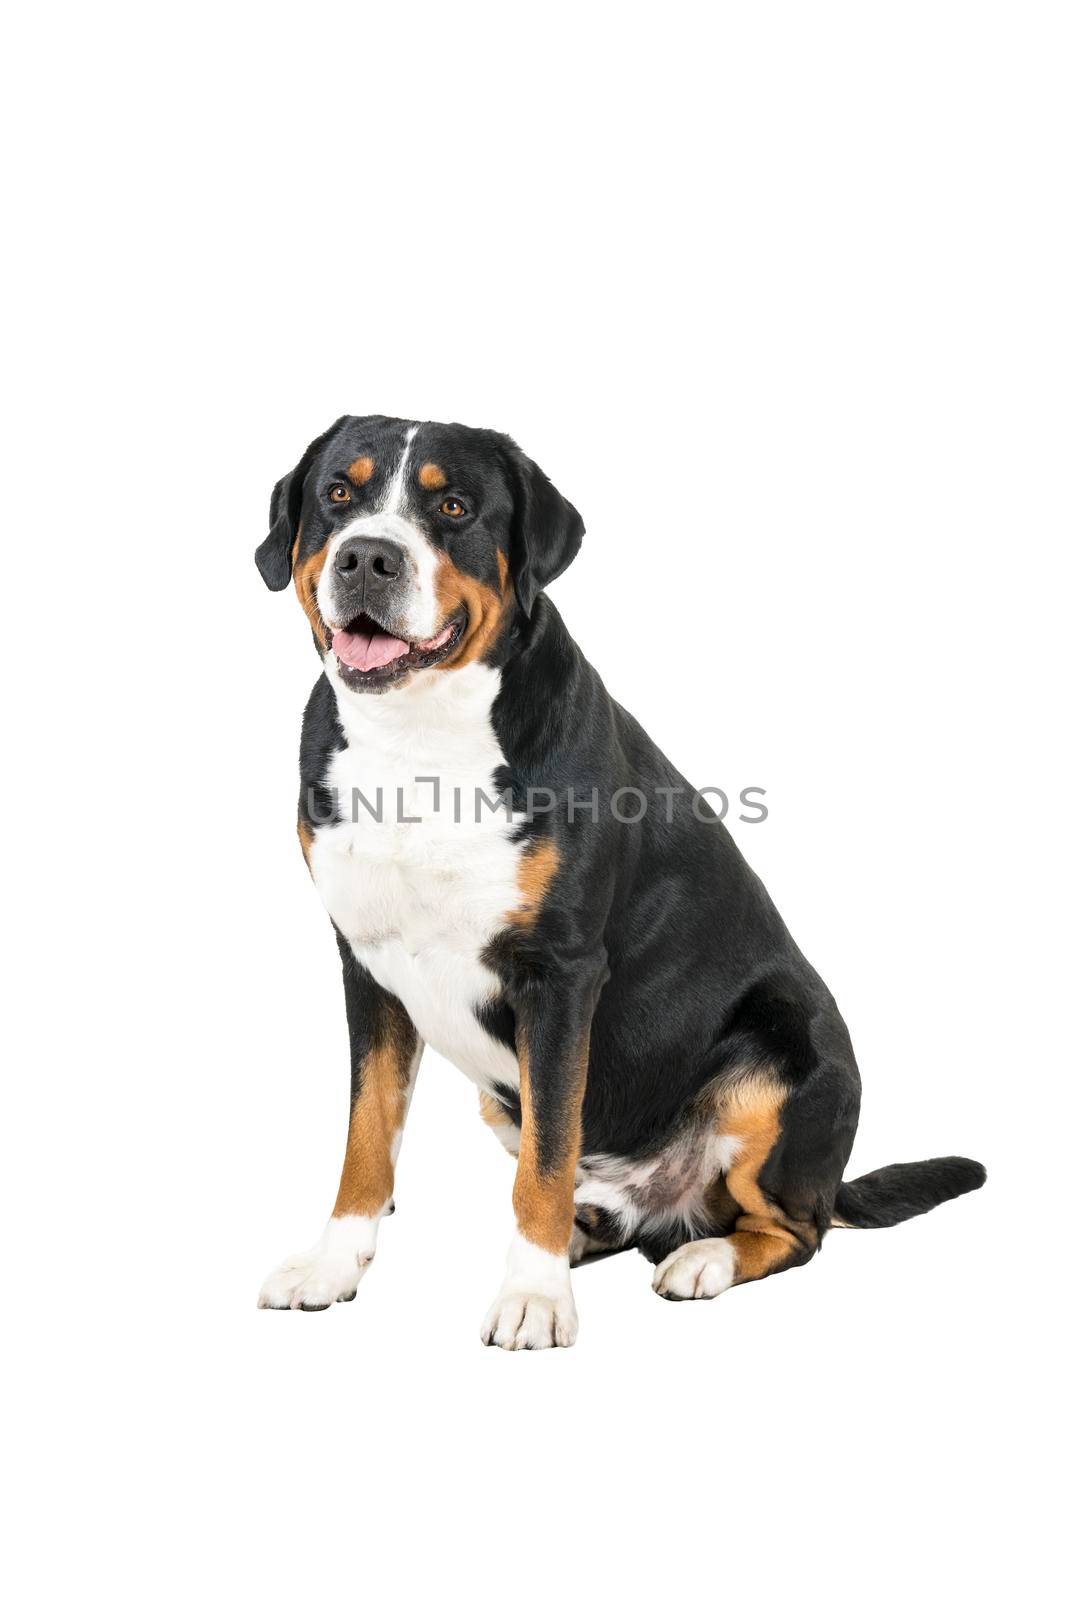 A Greater Swiss Mountain Dog sitting side ways and looking next to the camera